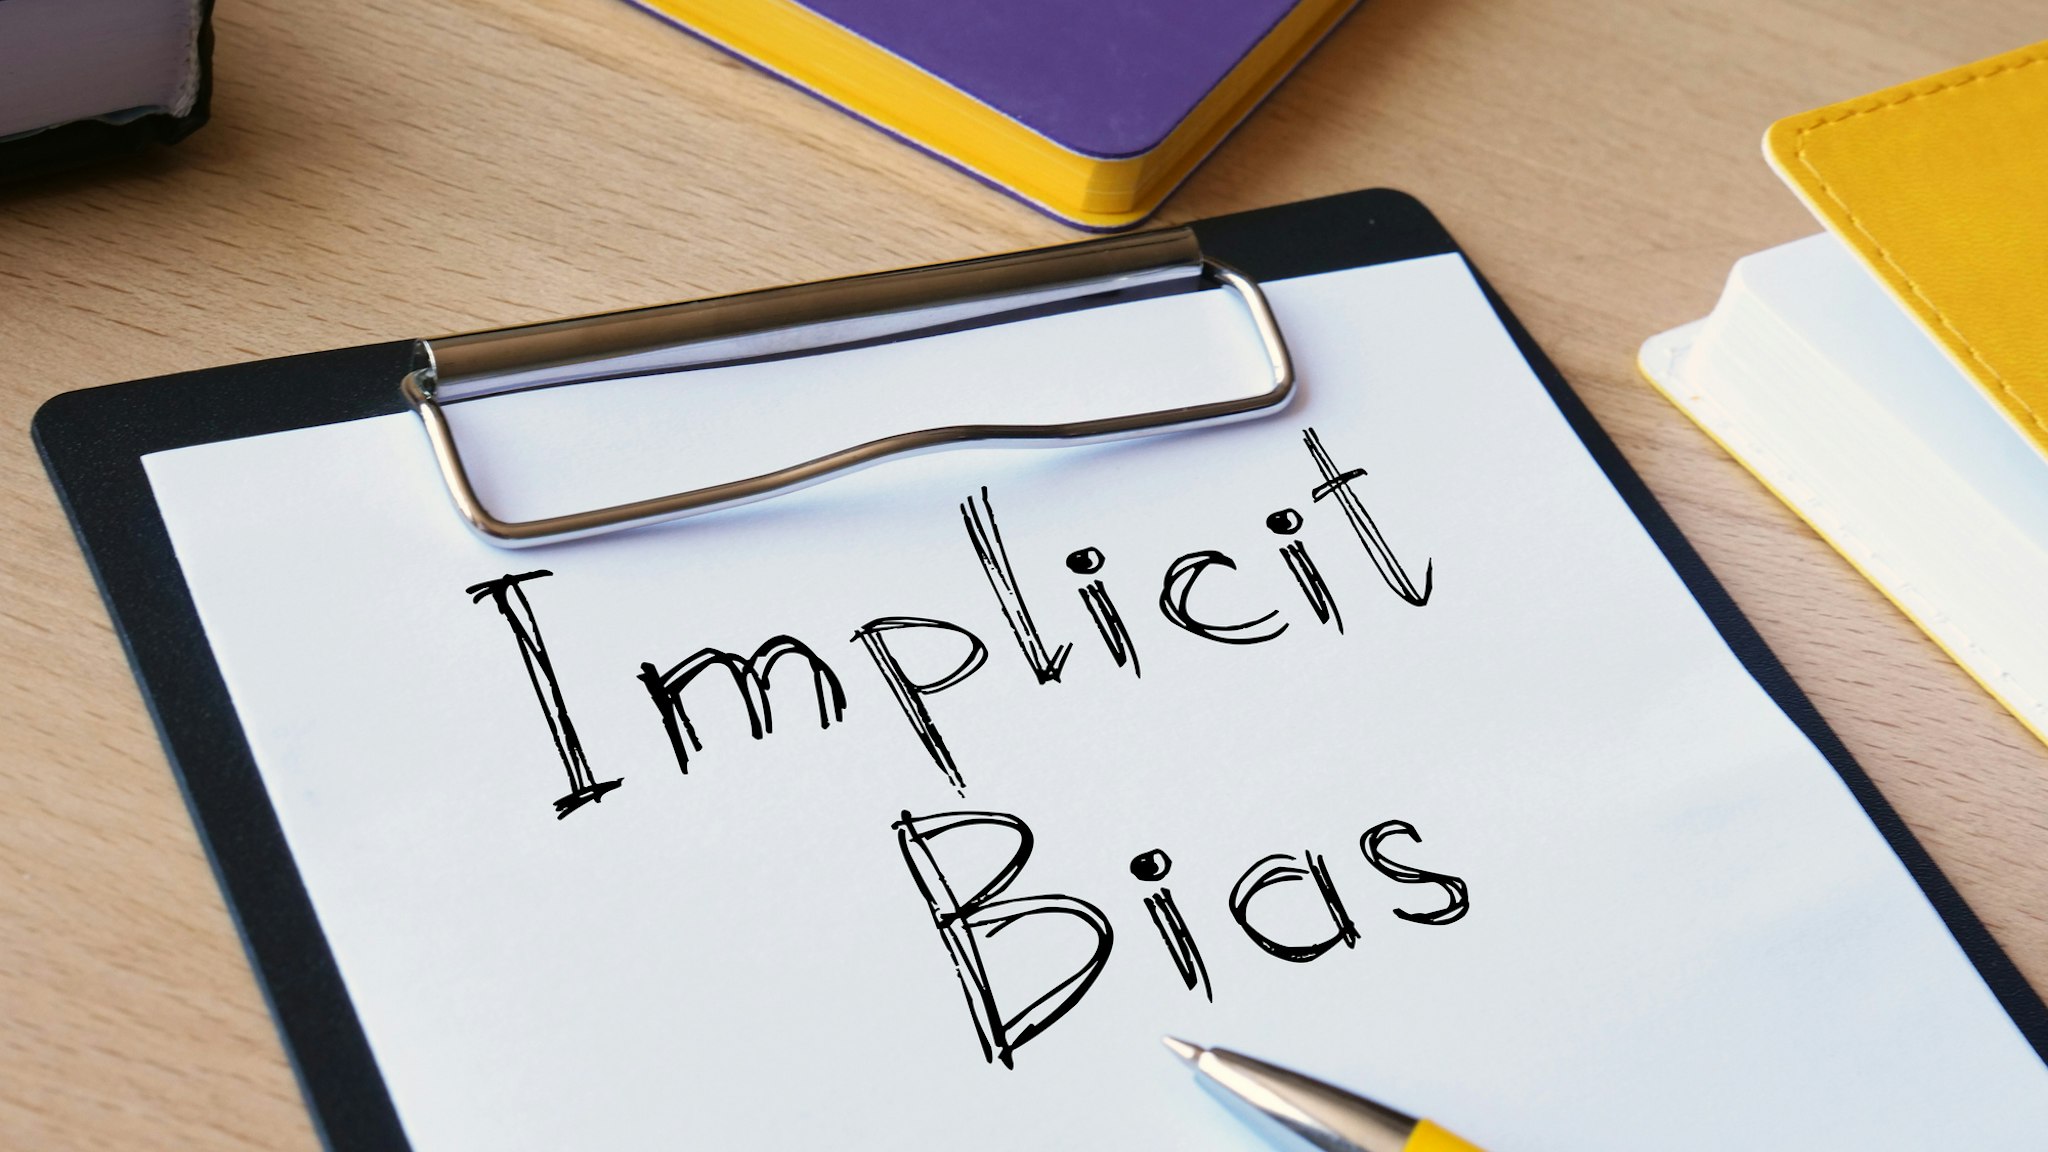 Implicit bias is shown on the conceptual photo using the text - stock photo